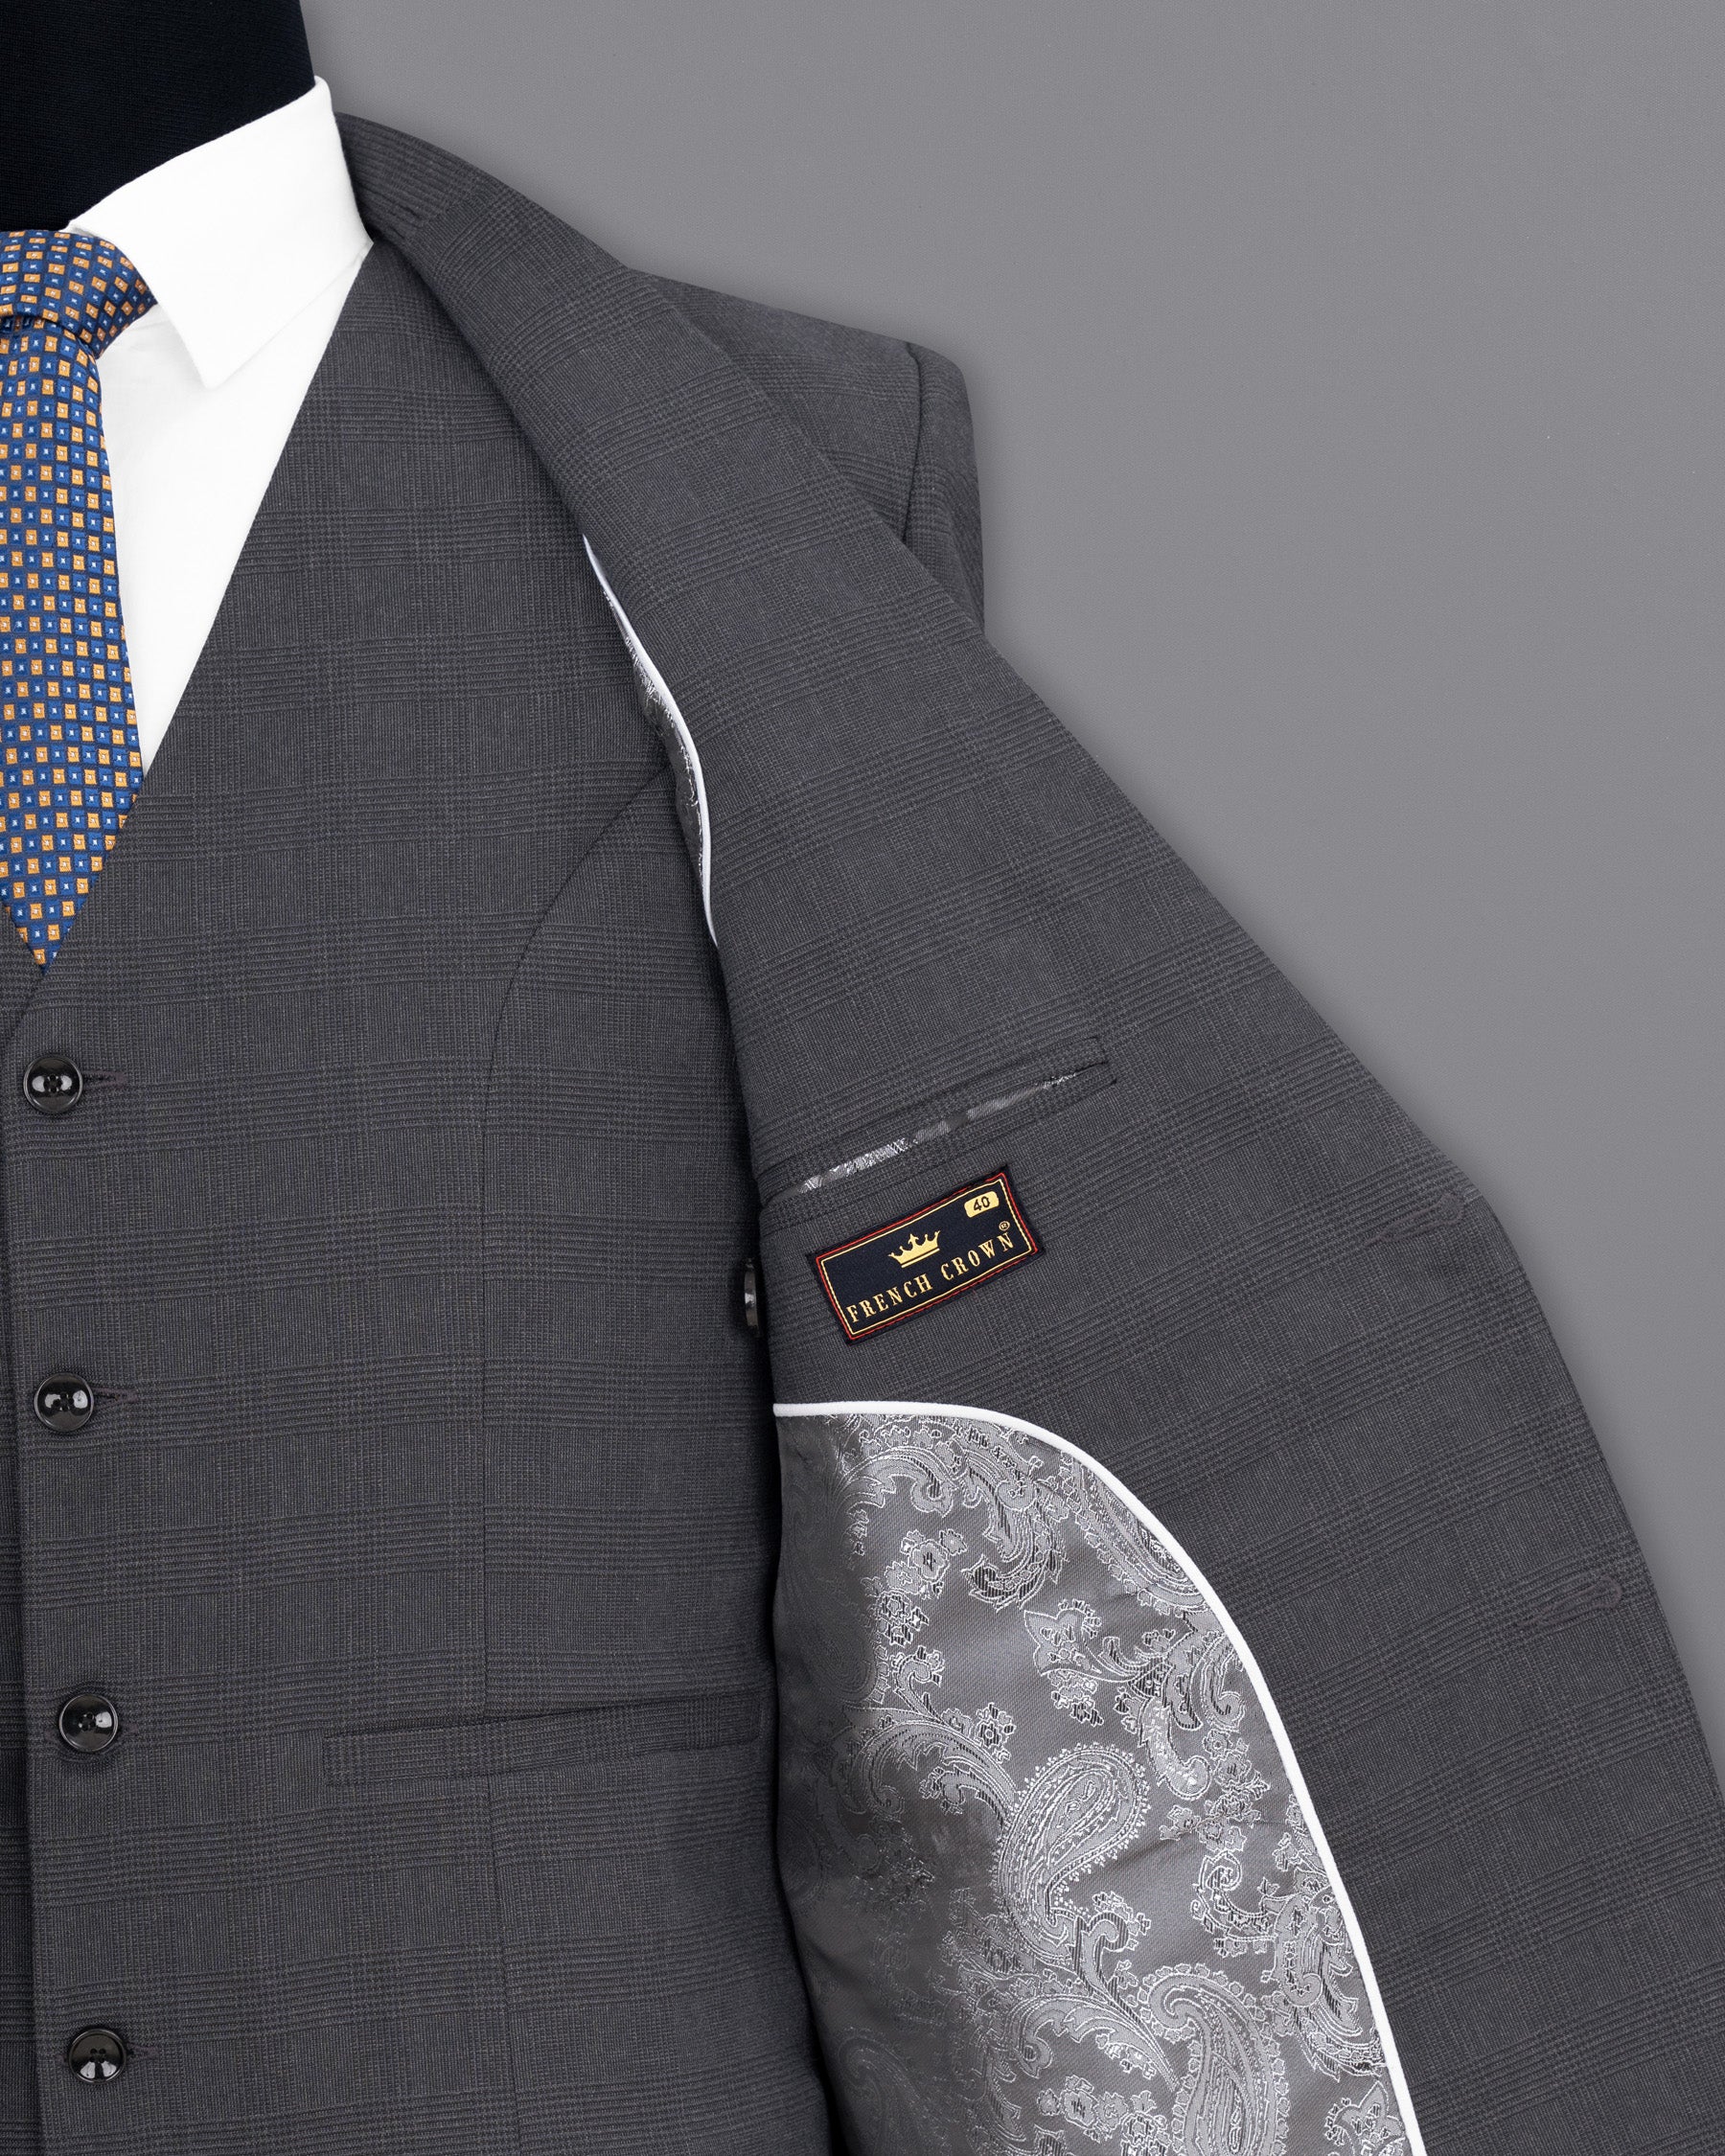 Gravel Gray Plaid Single Breasted Suit ST1849-SB-36, ST1849-SB-38, ST1849-SB-40, ST1849-SB-42, ST1849-SB-44, ST1849-SB-46, ST1849-SB-48, ST1849-SB-50, ST1849-SB-52, ST1849-SB-54, ST1849-SB-56, ST1849-SB-58, ST1849-SB-60